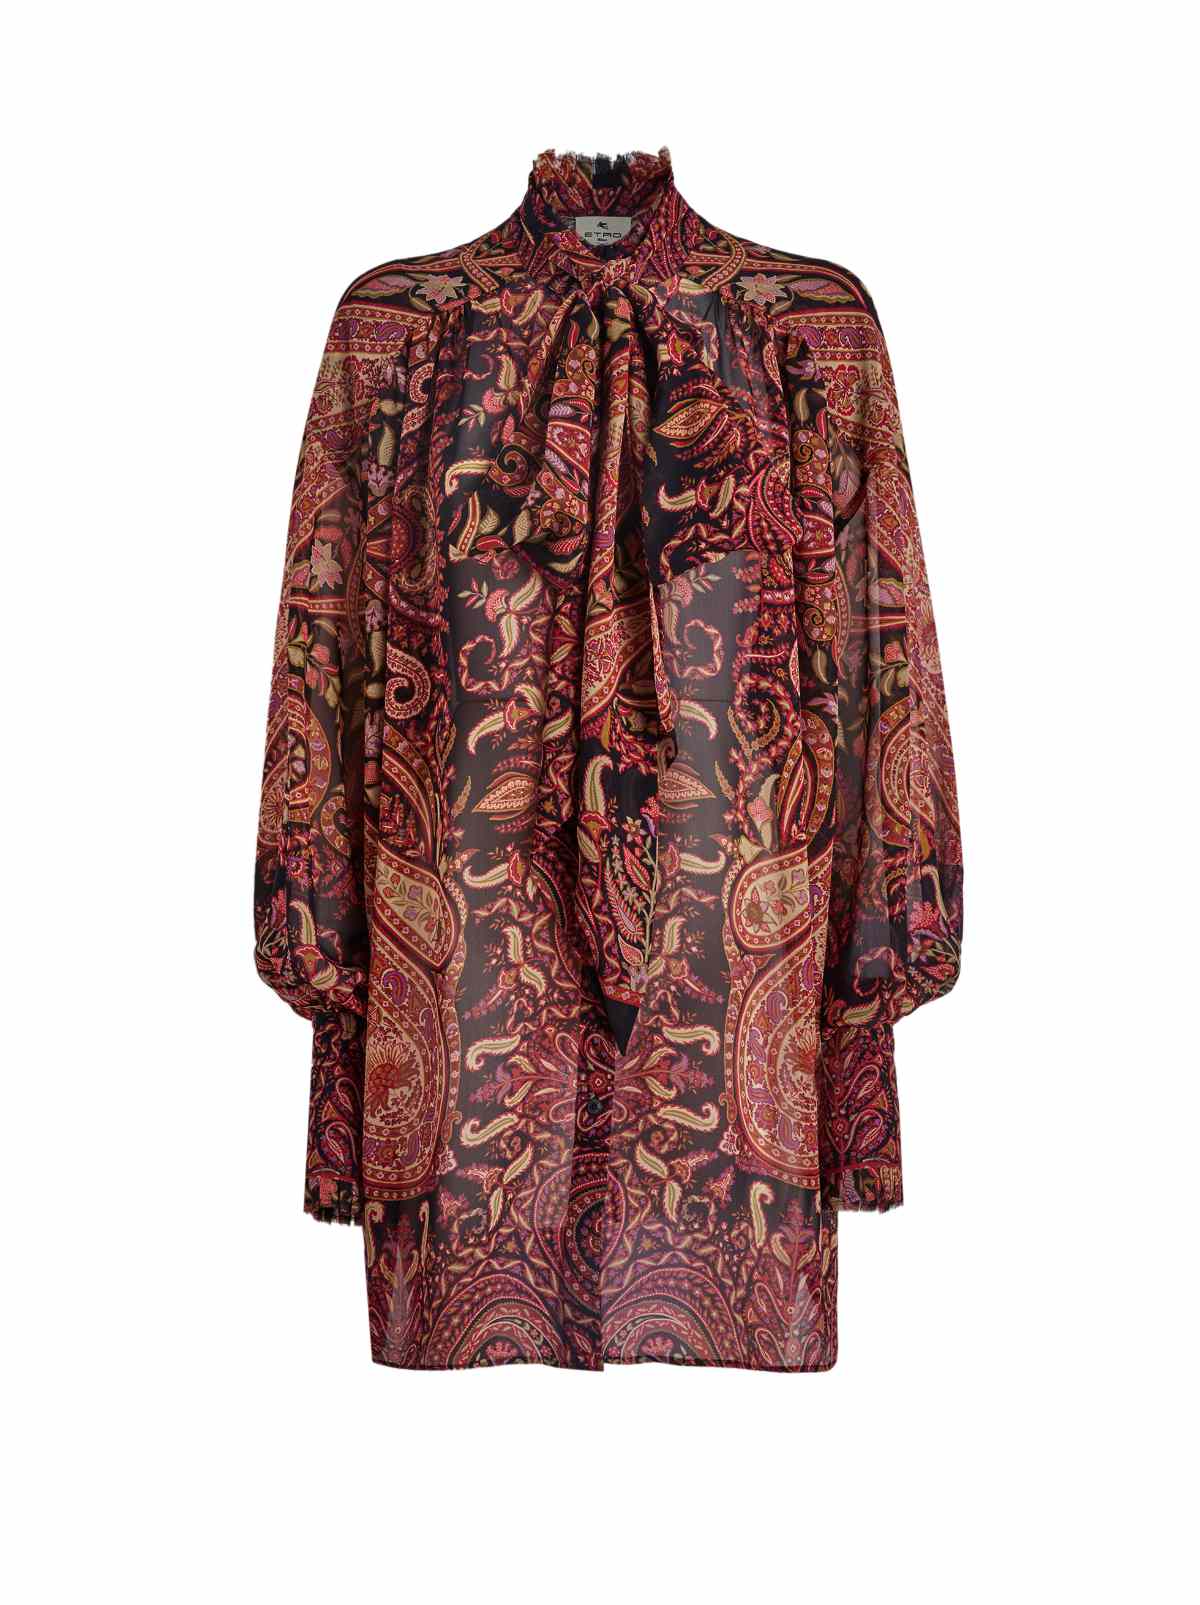 Etro Launched A Limited Capsule Collection In Collaboration With Harris Reed